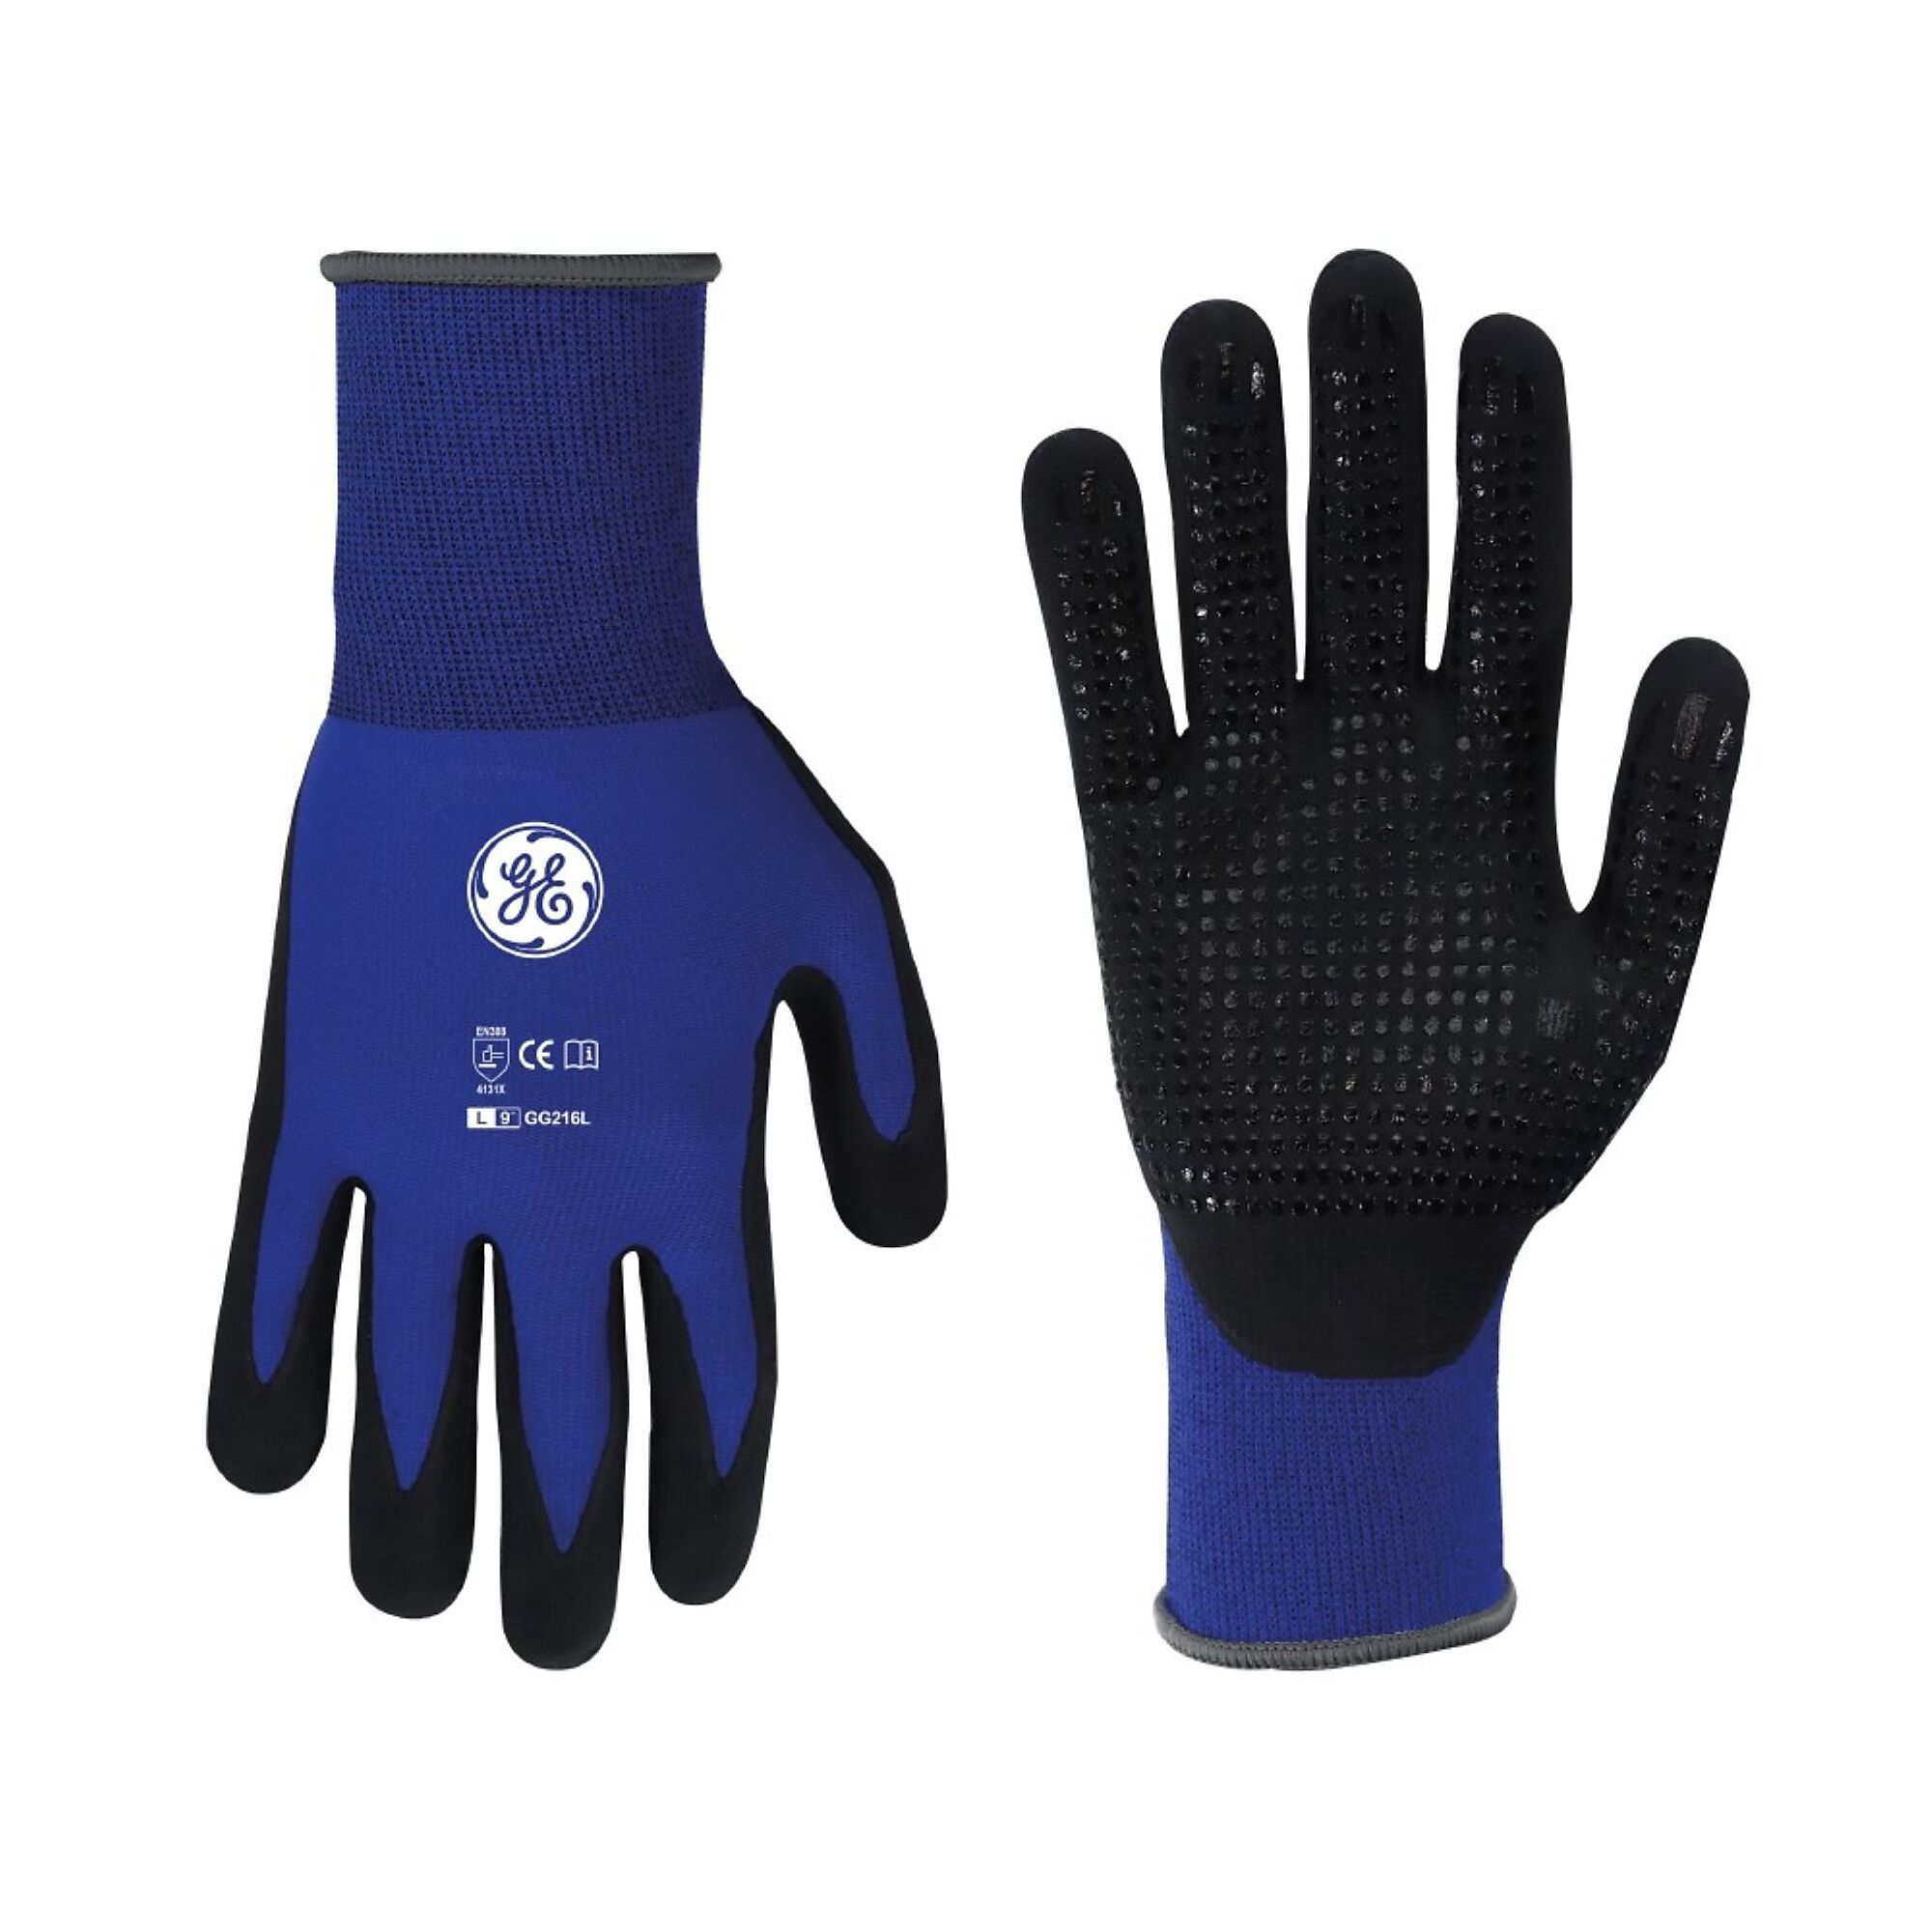 General Electric, Unisex Dipped Gloves Black/Blue L 12 pair, Size L, Included (qty.) 12, Model GG216L